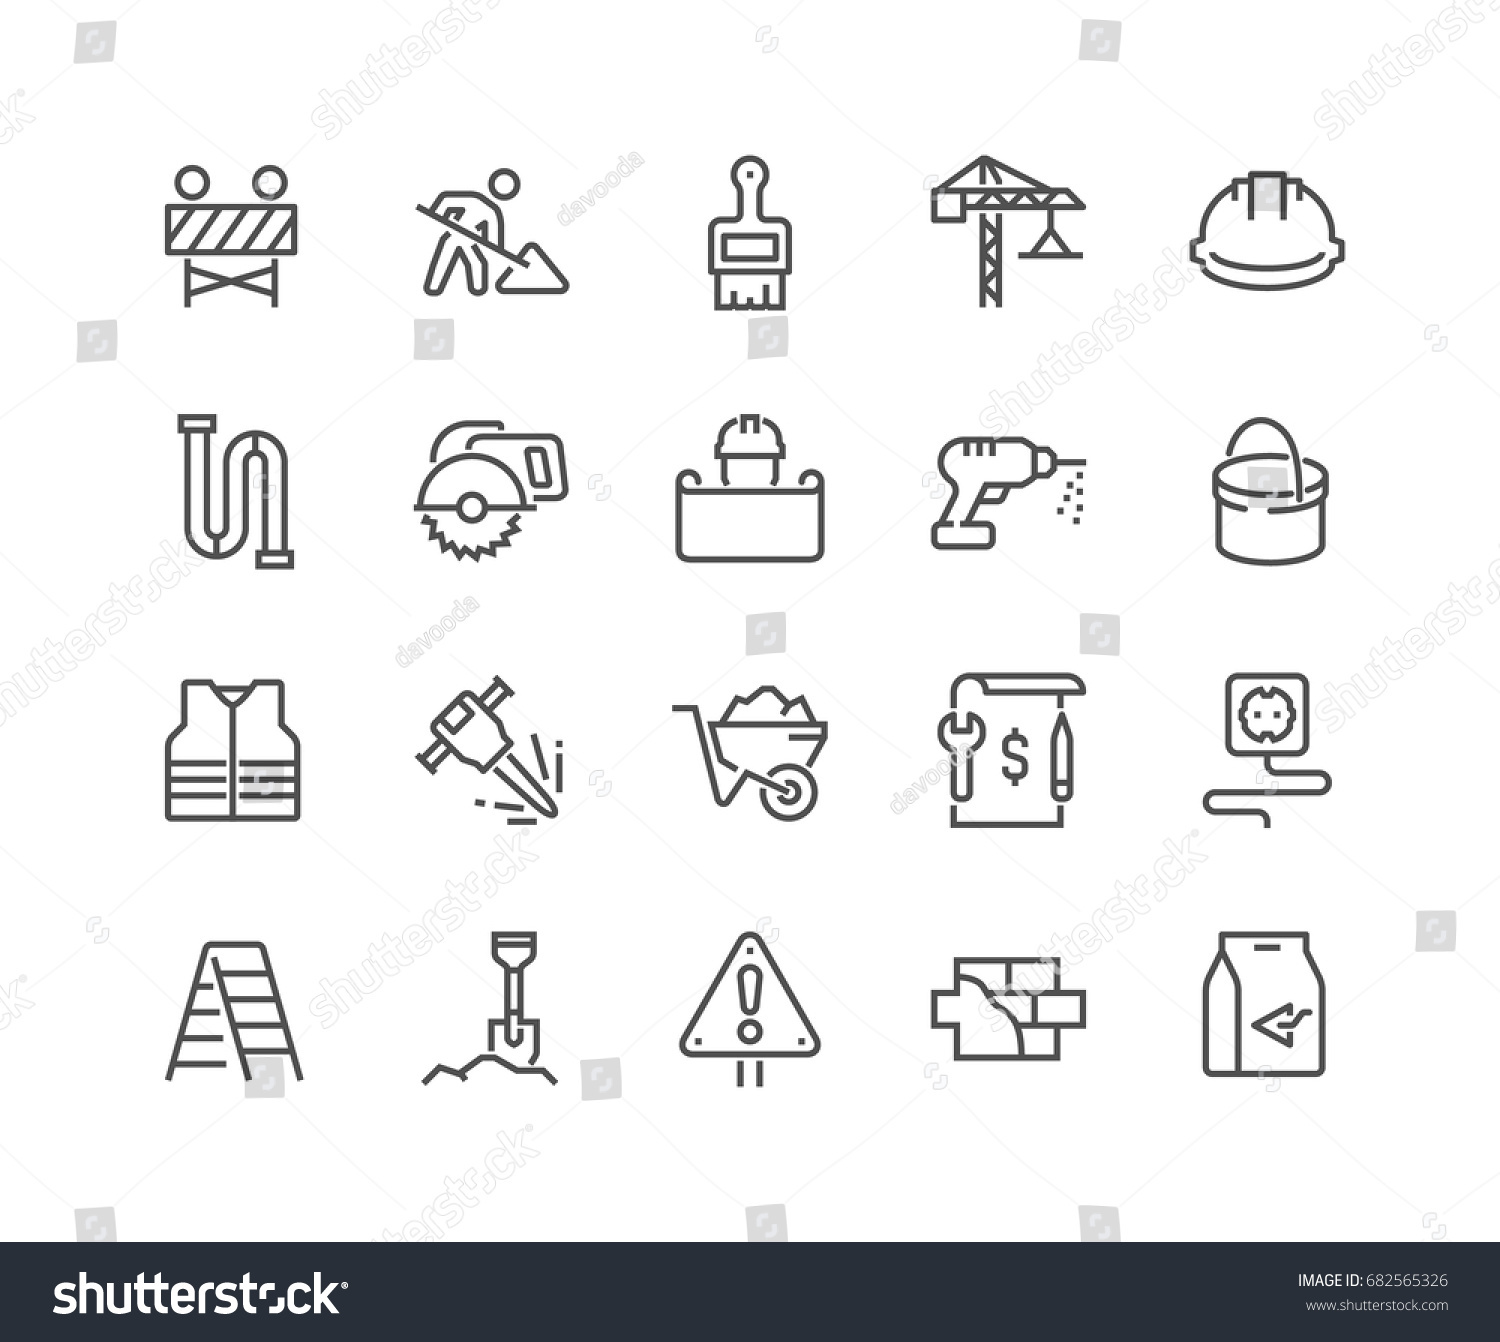 Simple Set of Construction Related Vector Line Icons. 
Editable Stroke. 48x48 Pixel Perfect.